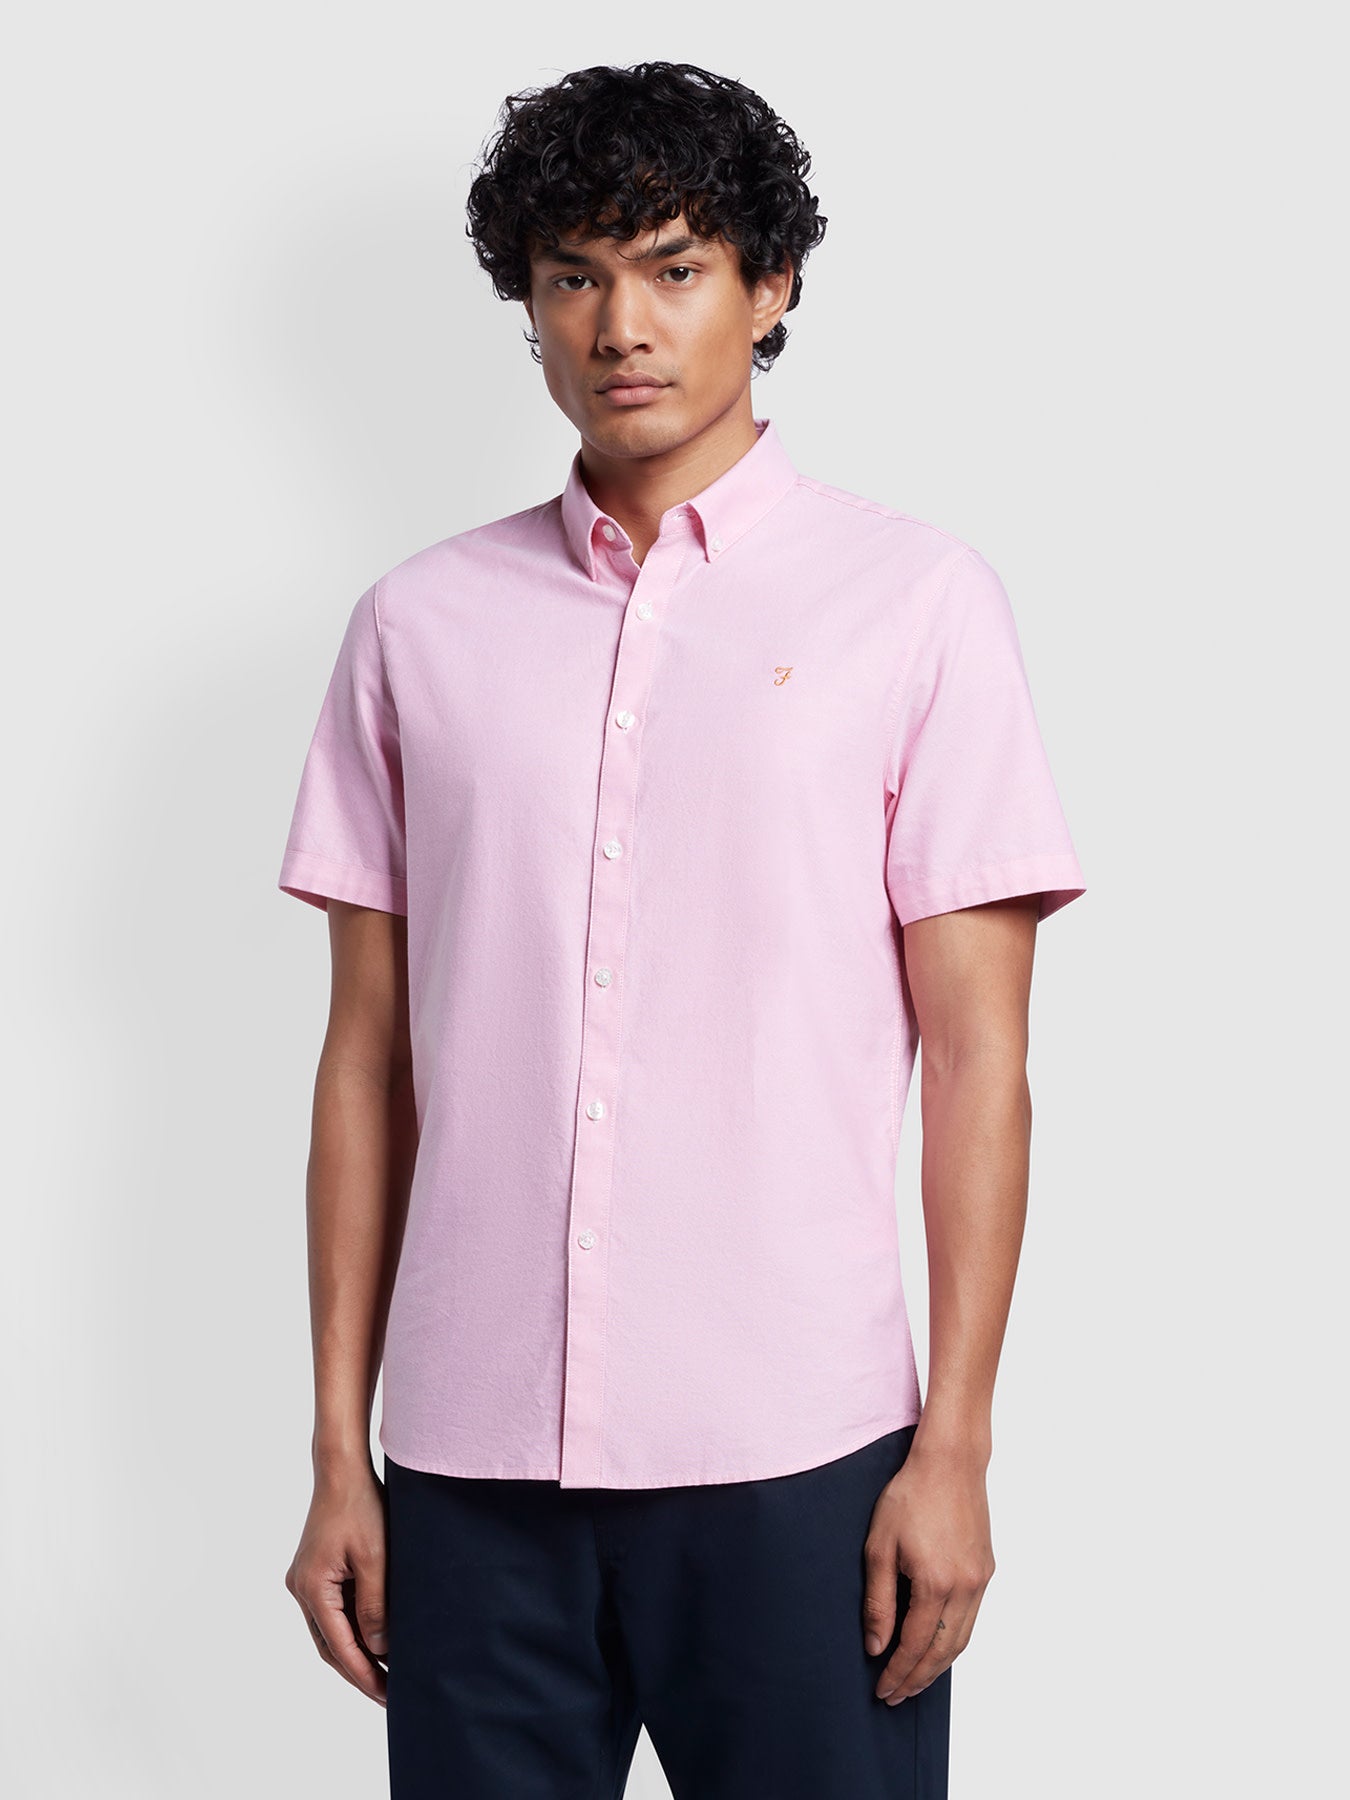 View Brewer Short Sleeve Oxford Shirt In Coral Pink information